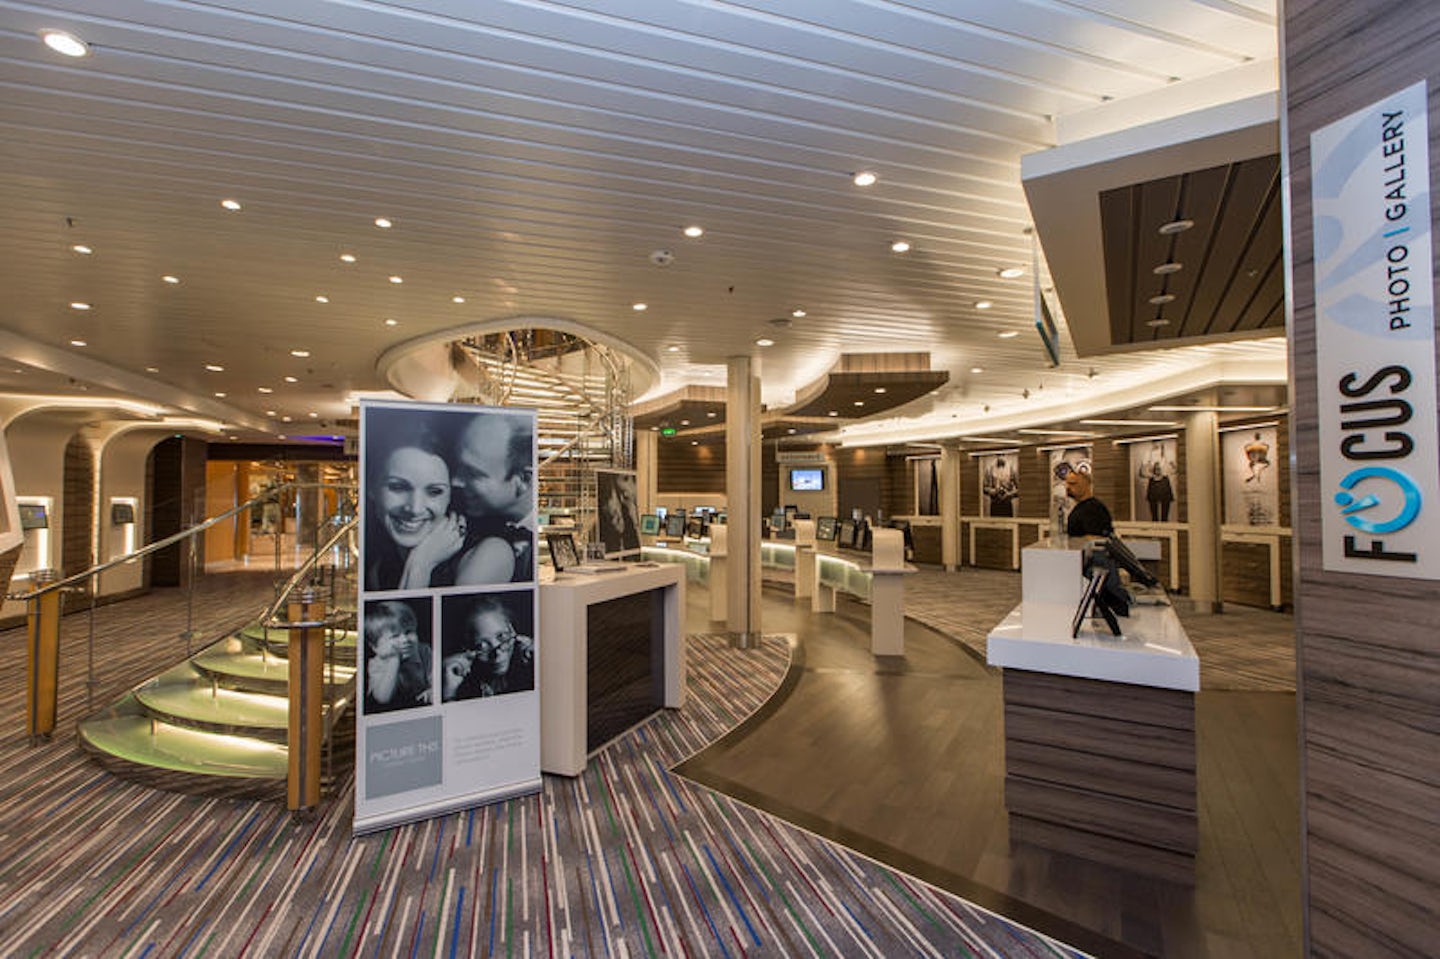 Photo and Video Gallery on Liberty of the Seas